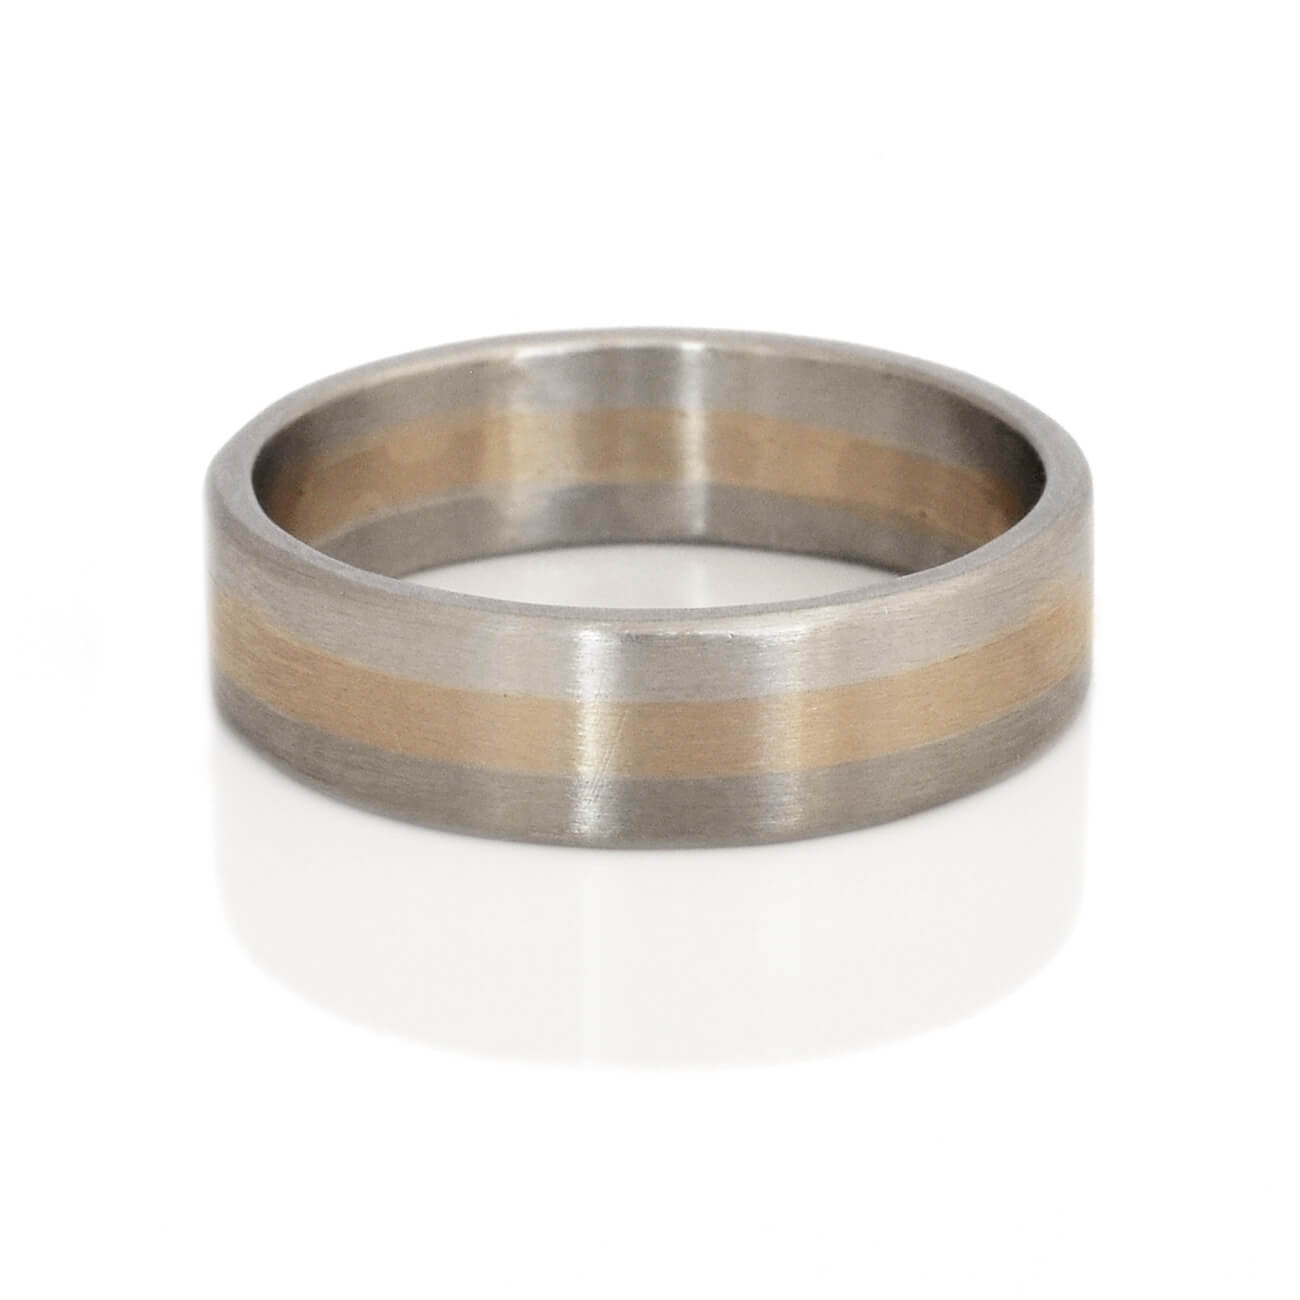 Mixed metal wedding band made with recycled gold and palladium. 